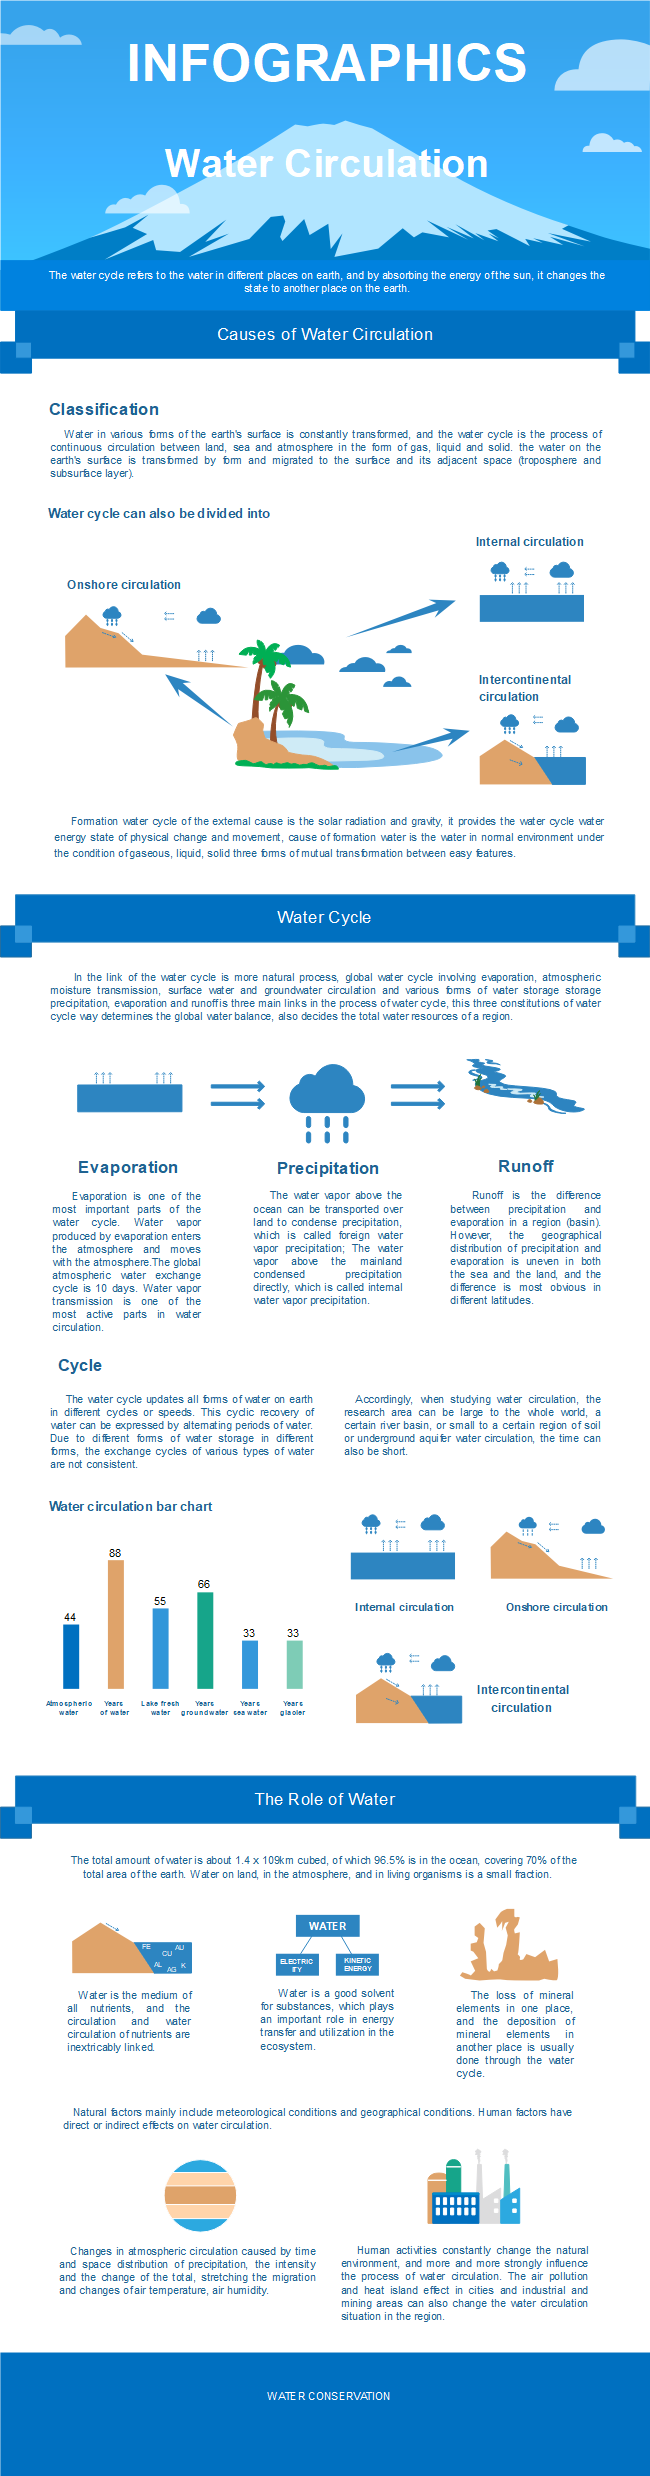 Water Circulation Infographic